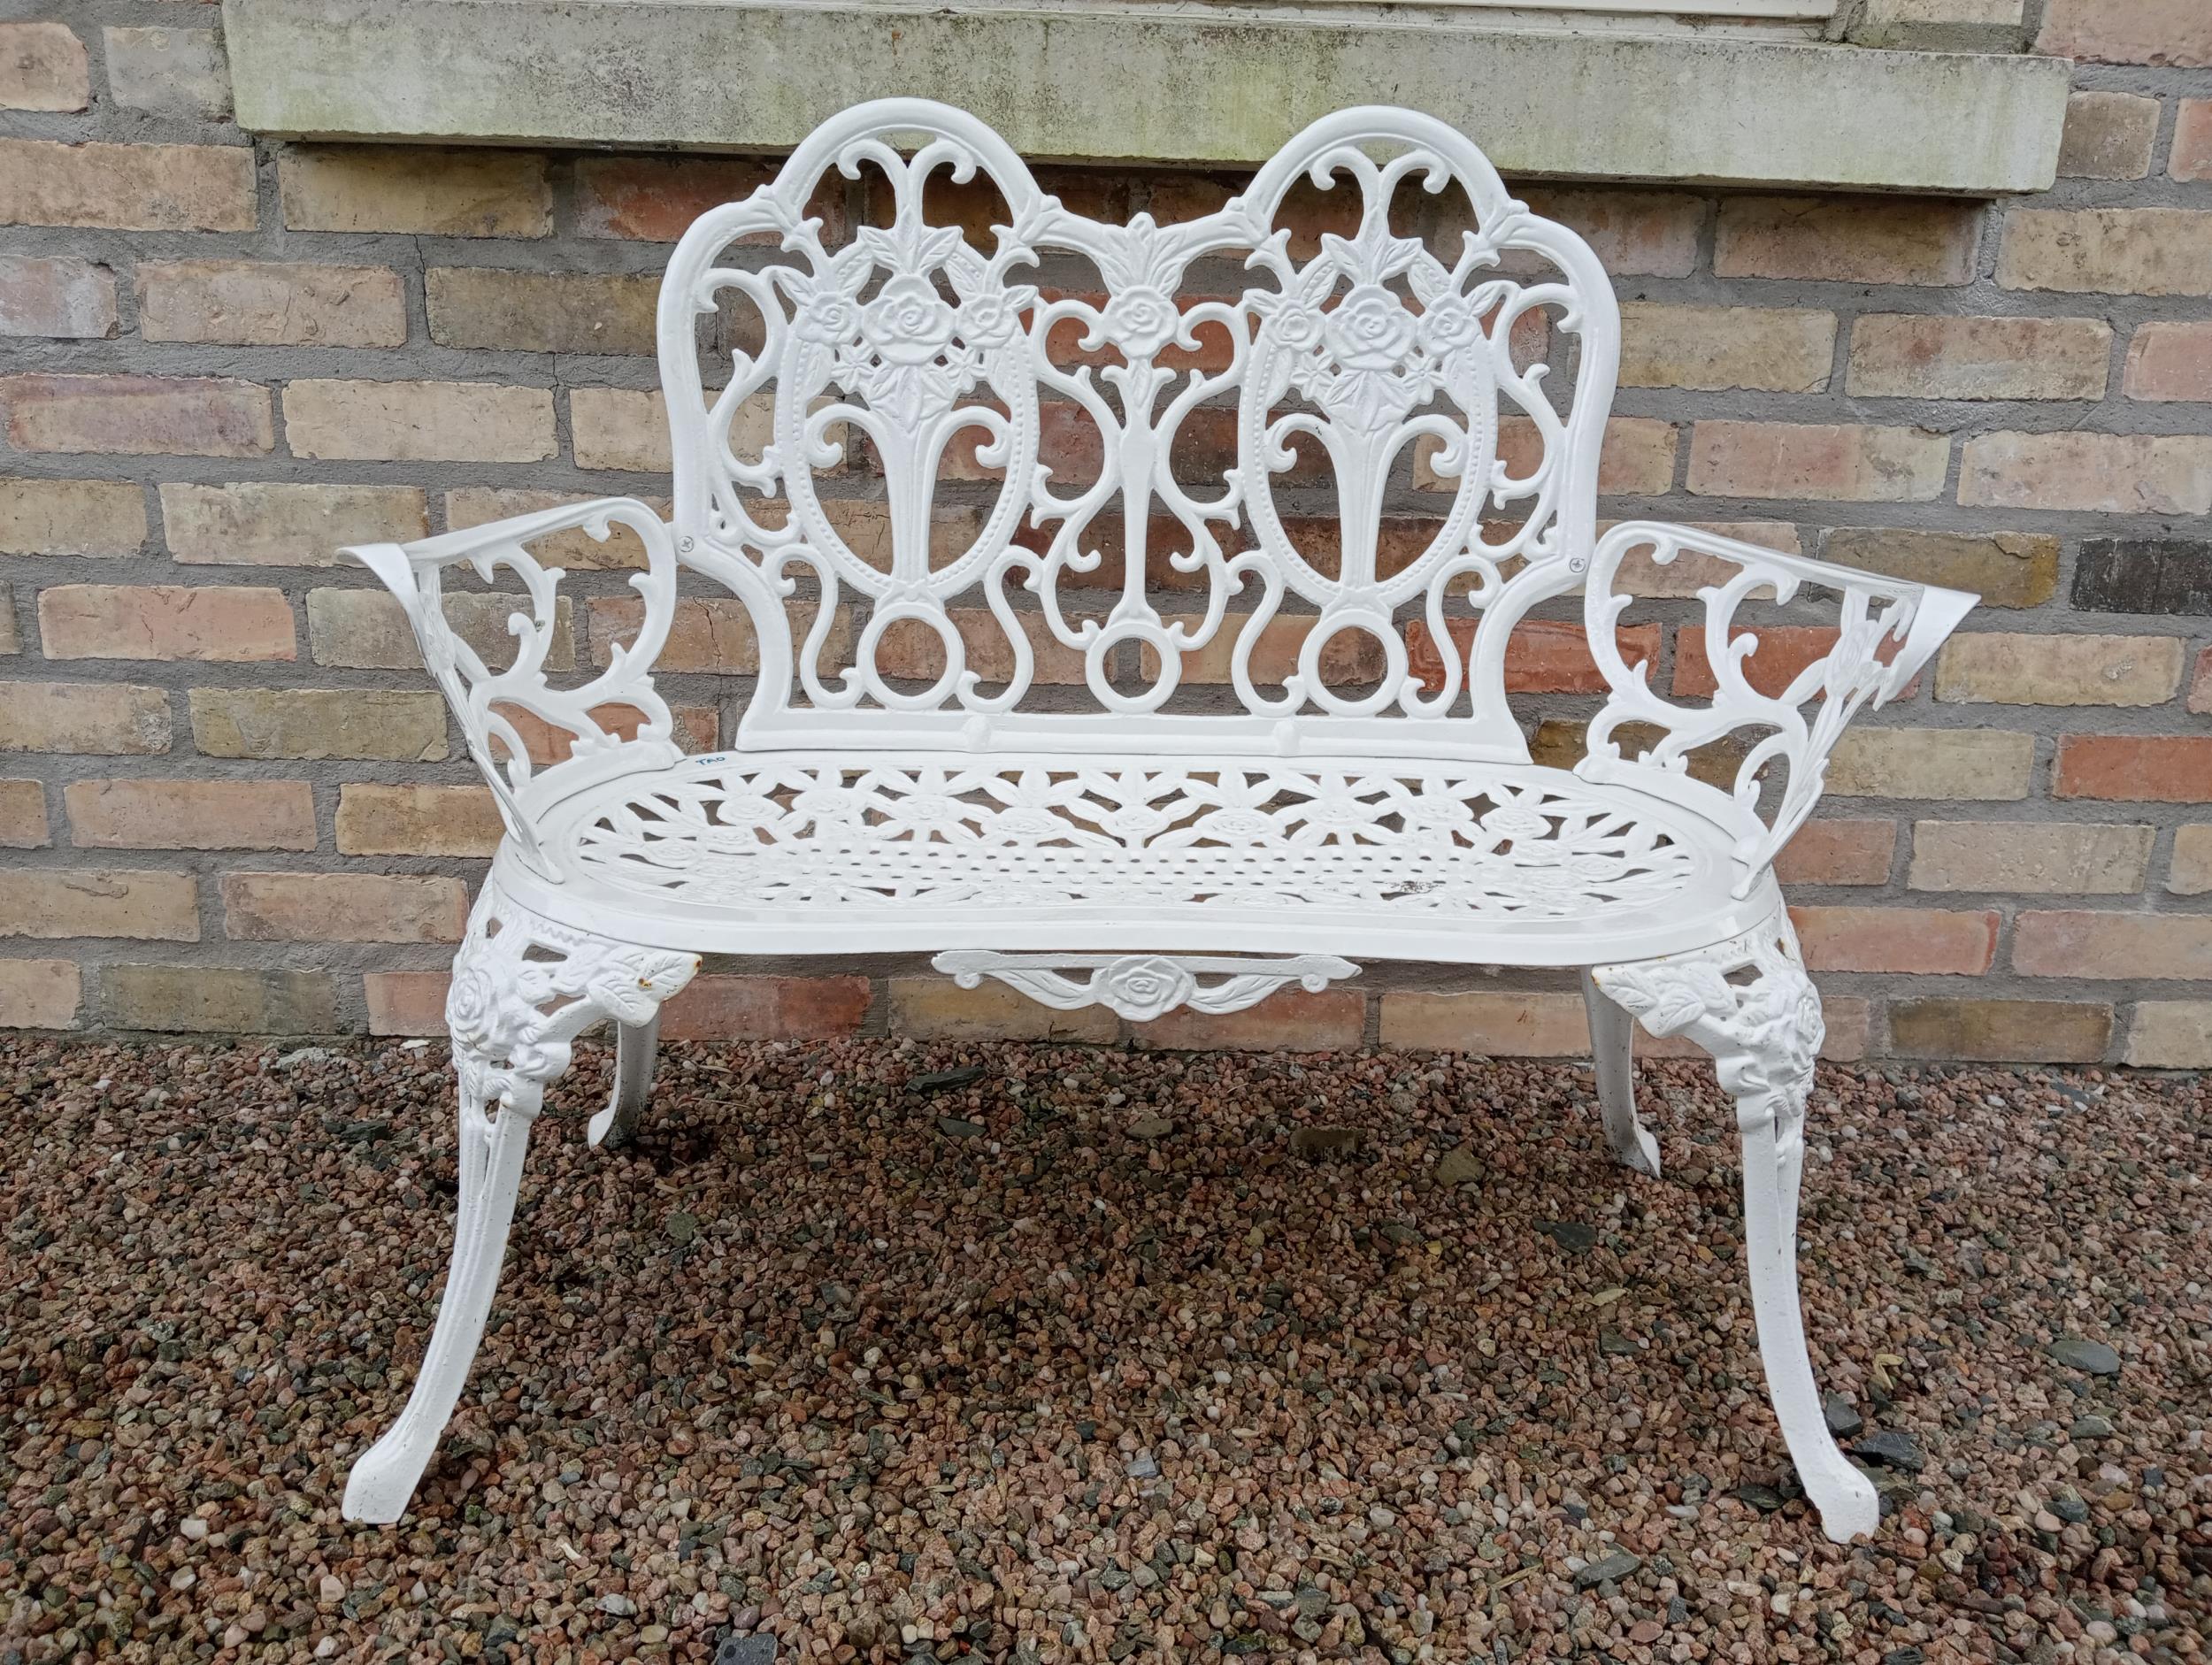 Cast Aluminium two seater garden bench {H 84cm x W 100cm x D 50cm }. (NOT AVAILABLE TO VIEW IN